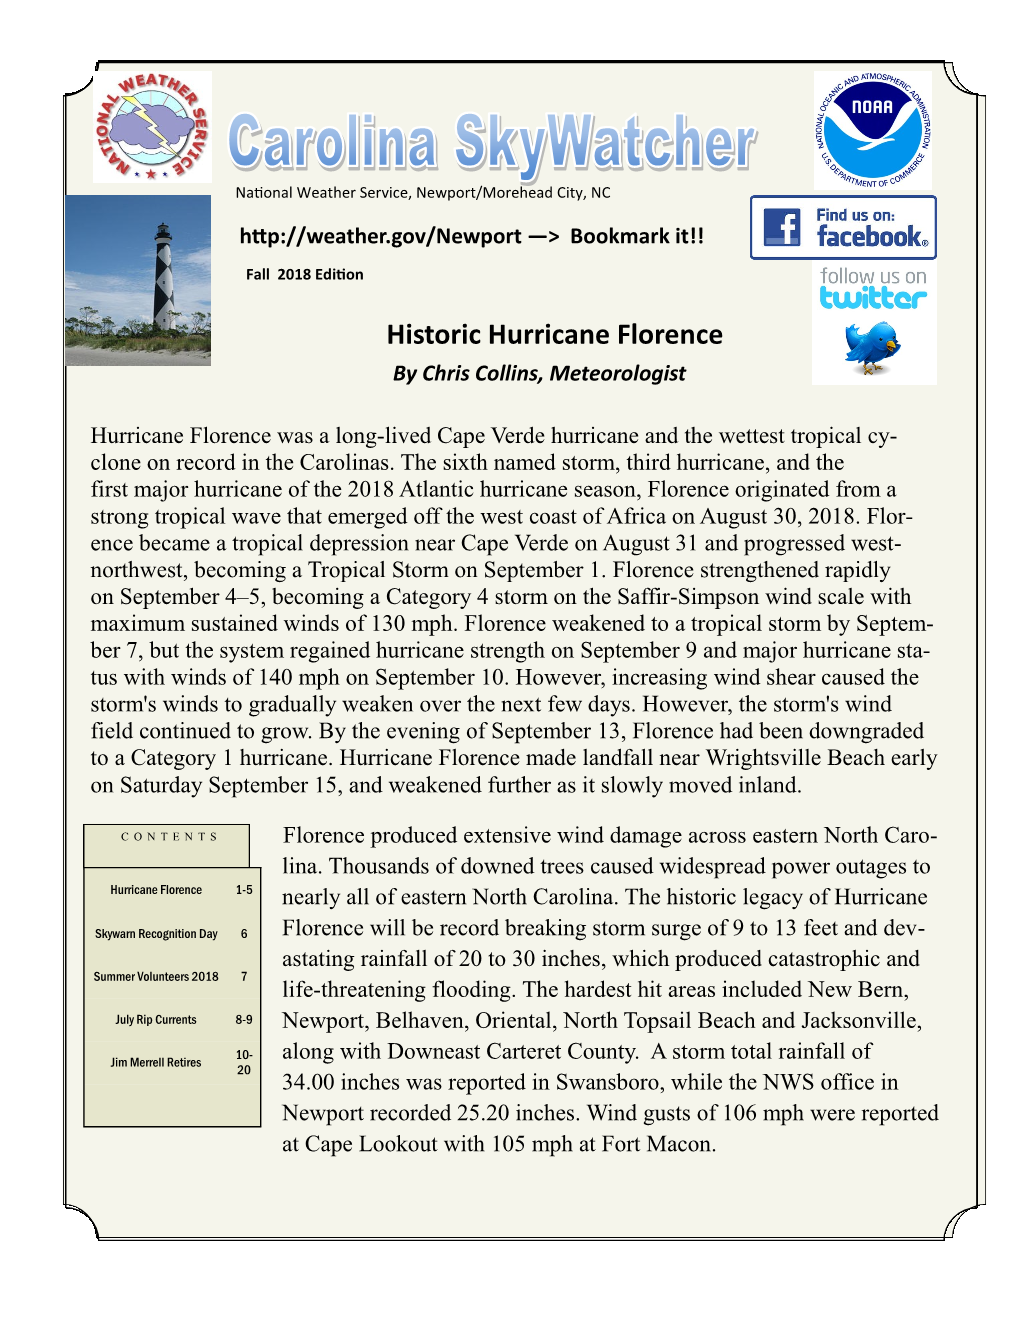 Historic Hurricane Florence by Chris Collins, Meteorologist